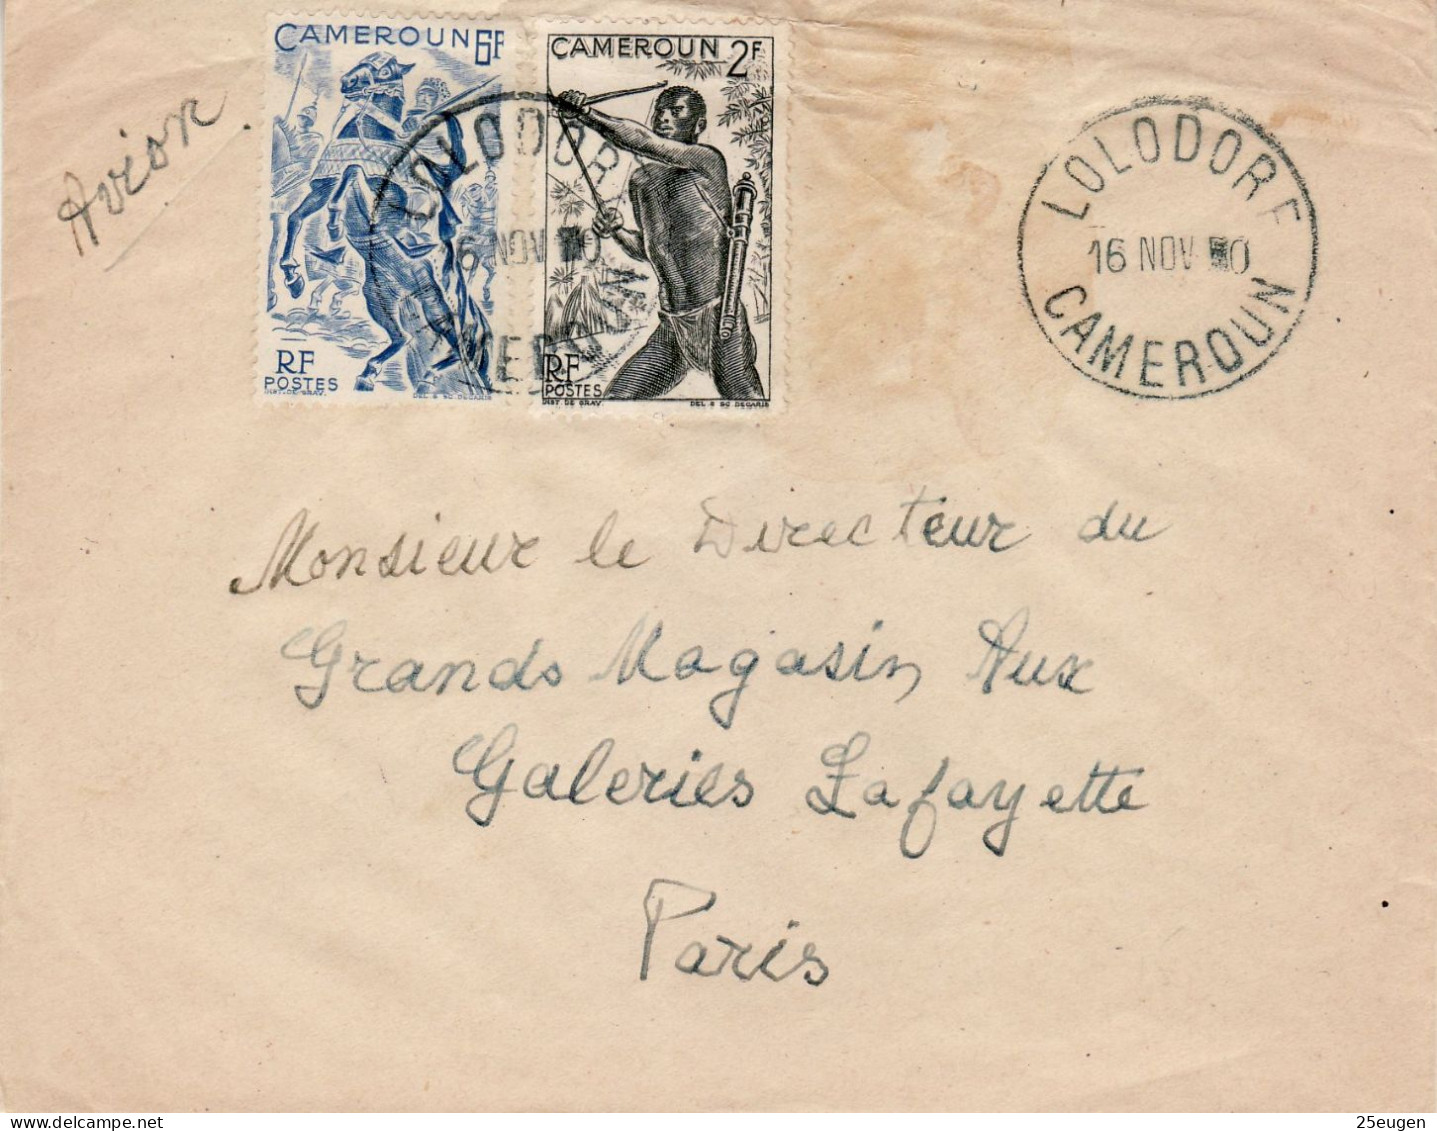 CAMEROUN 1950 AIRMAIL LETTER SENT FROM LOLODORE TO PARIS - Storia Postale